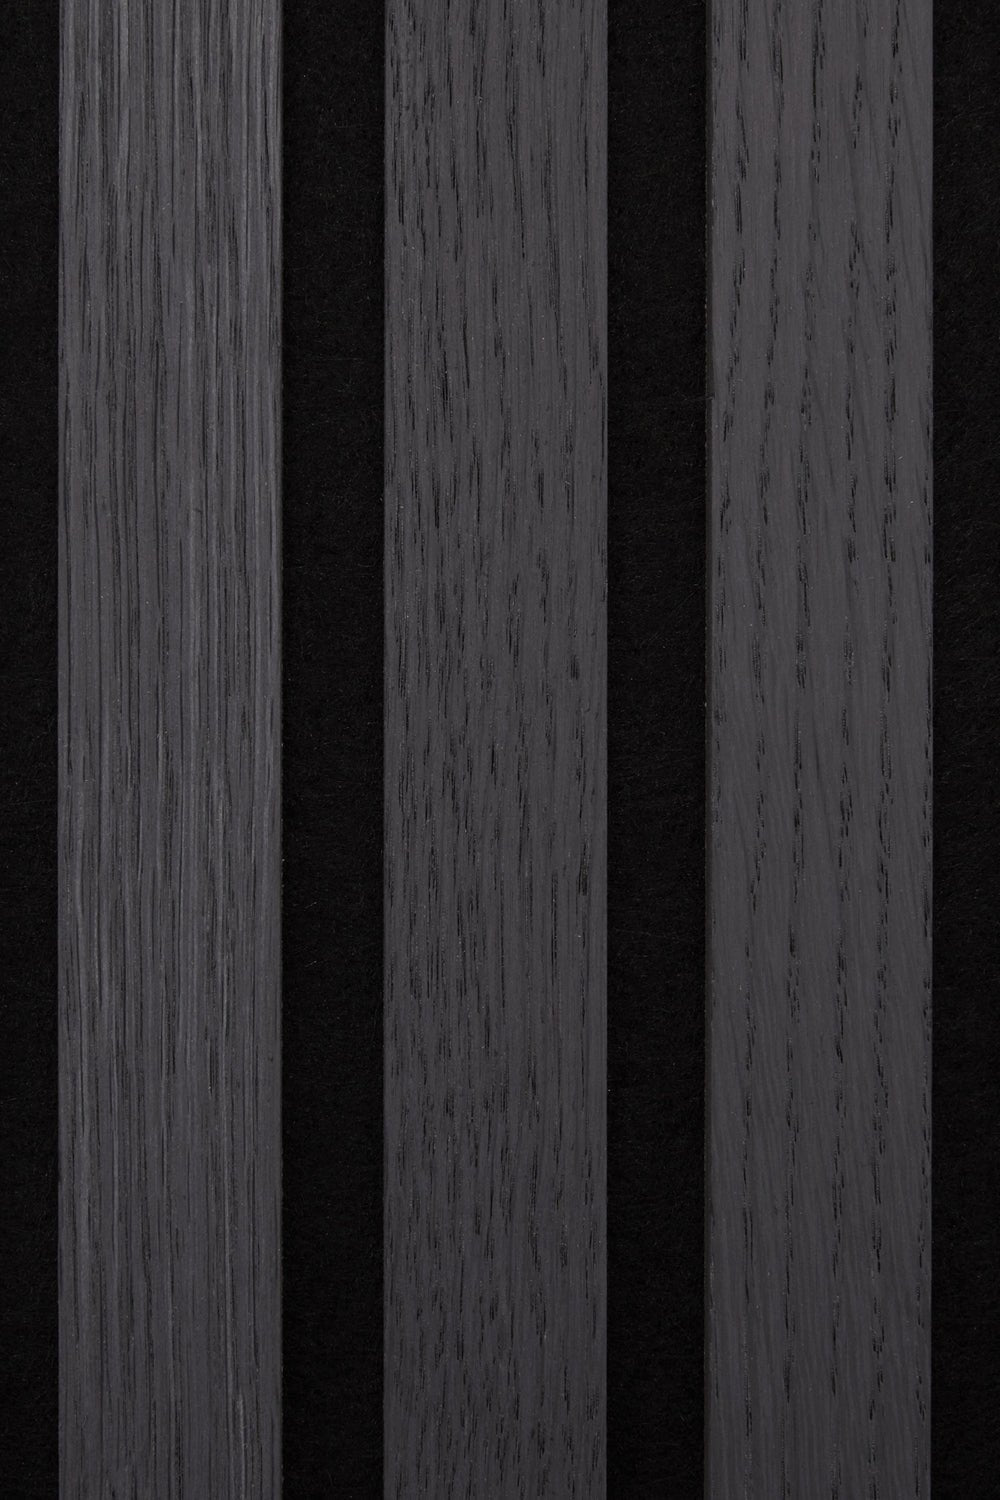 Texture of the Charcoal Black Acoustic SlatWall Panel from Naturewall.

